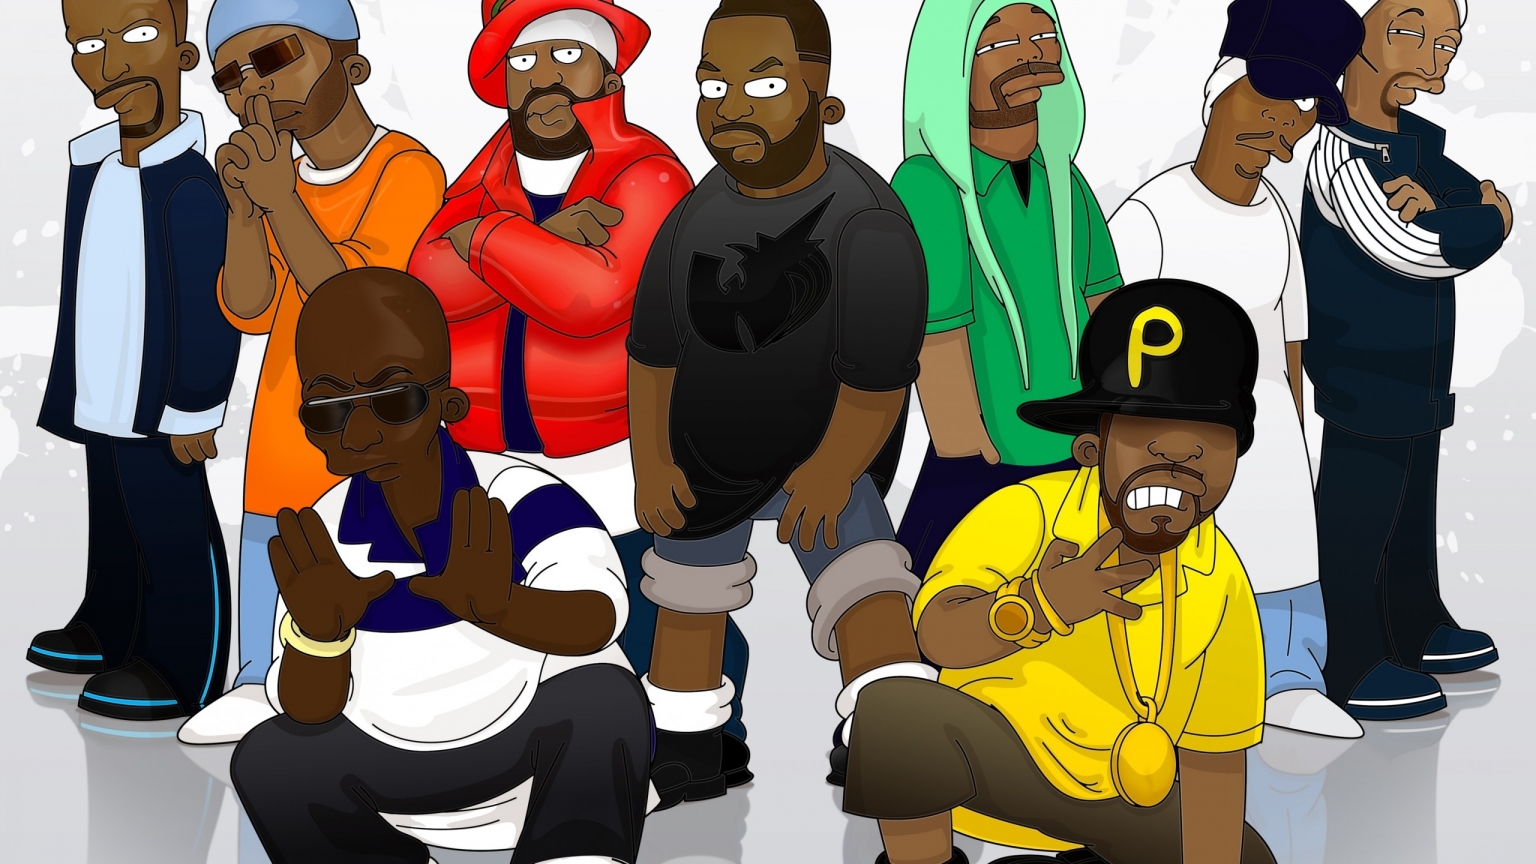 Wu-Tang Clan Group for 1536 x 864 HDTV resolution